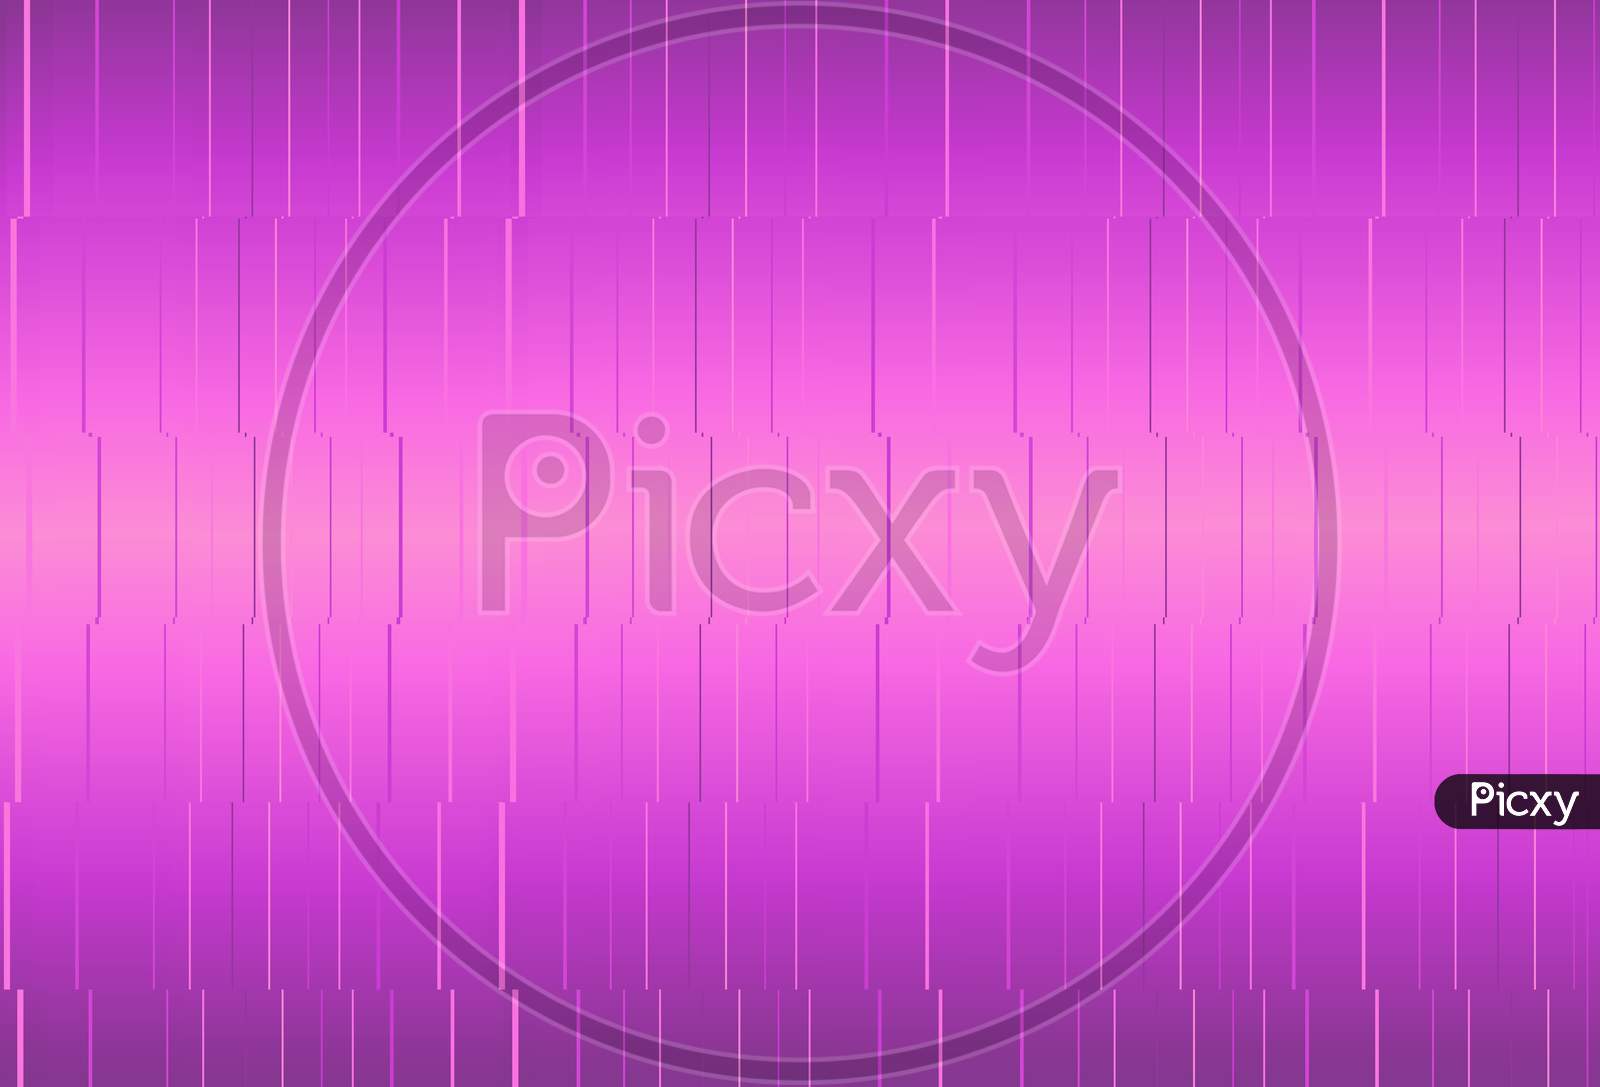 Abstract pink purple gradient background with vertical striped and horizontal center spotlight effect. 3d illustration, 3d rendering. Elegant pink texture for advertisement, product display, business